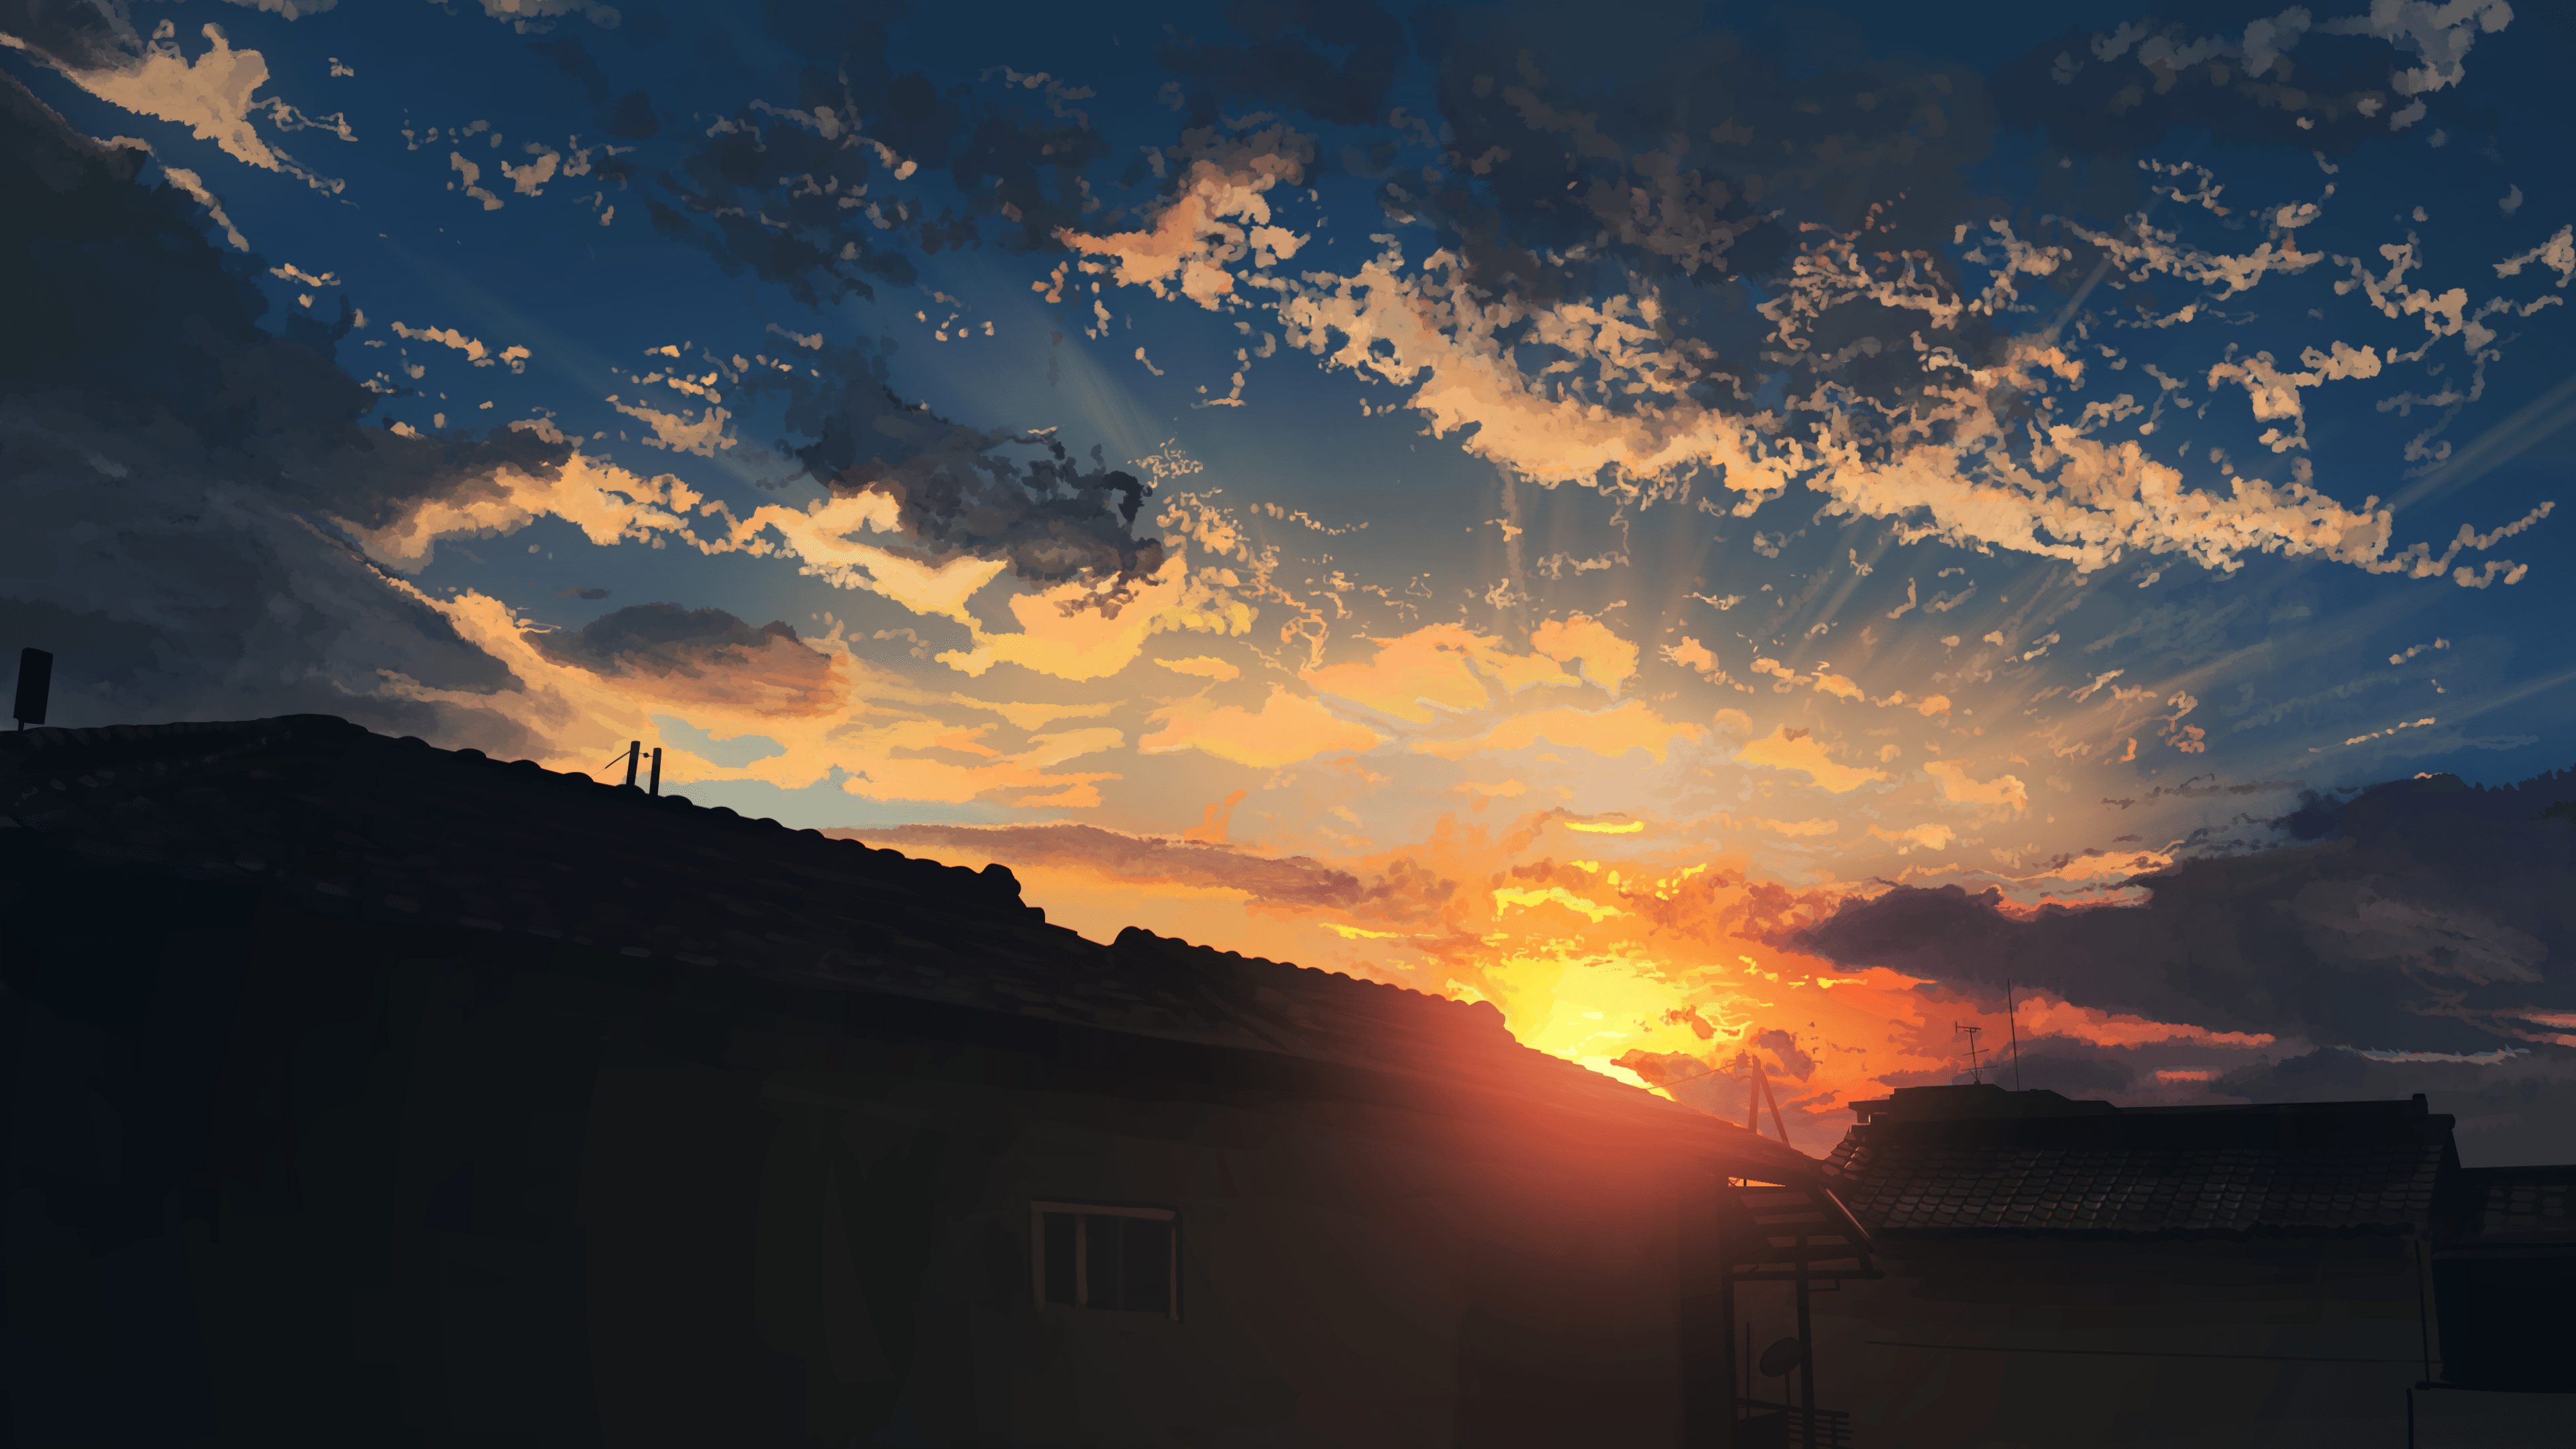 A digital painting of a sunset over a city with a blue and orange sky. - Anime sunset